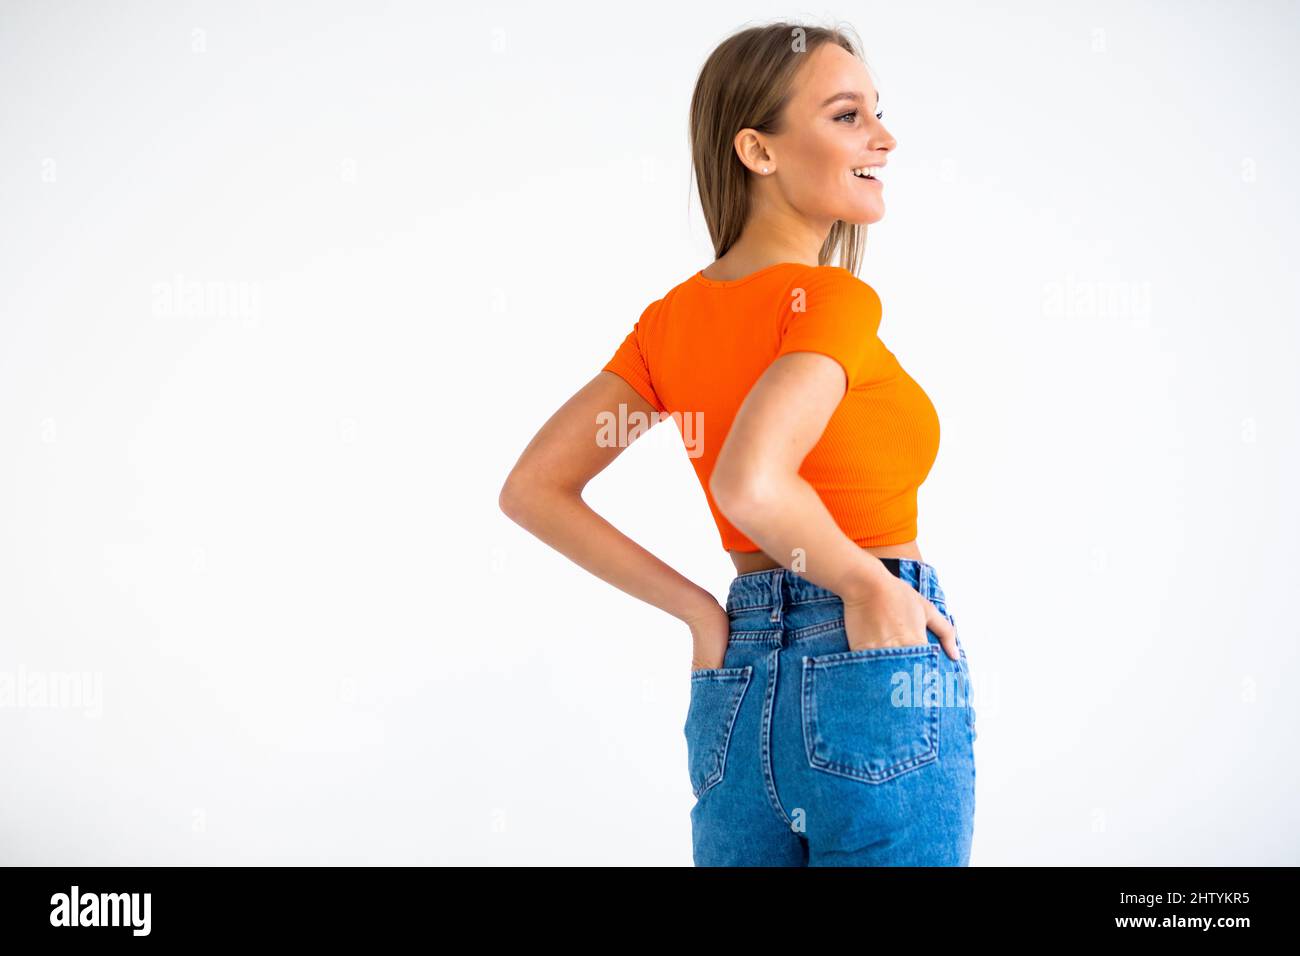 pretty women 's ass in tight jeans on white background Stock Photo - Alamy